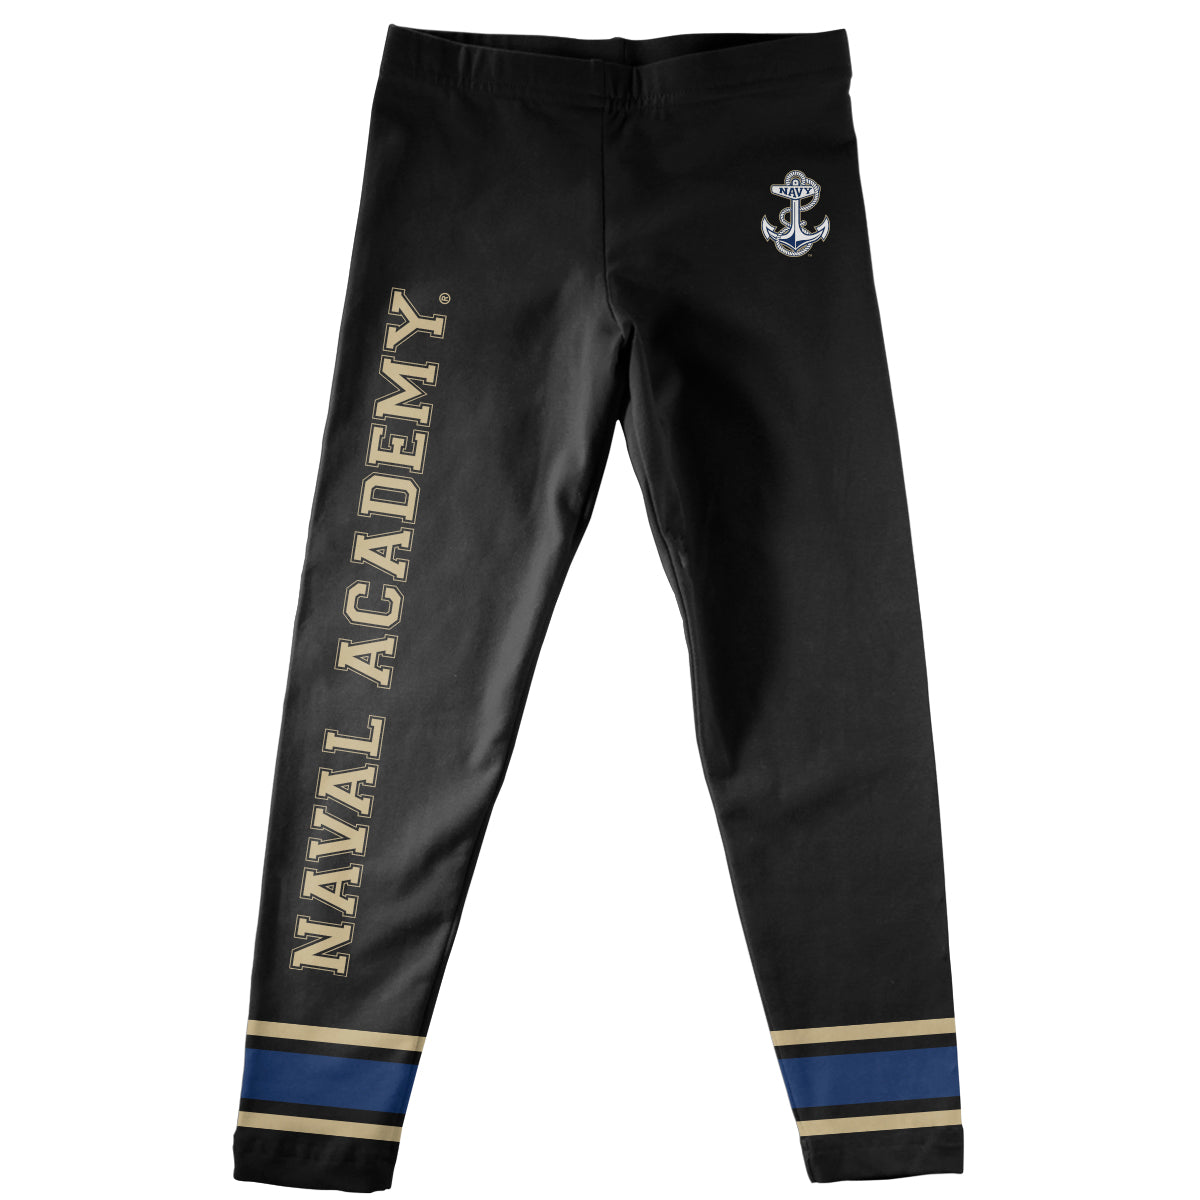 United States Naval Academy Verbiage And Logo Black Stripes Leggings